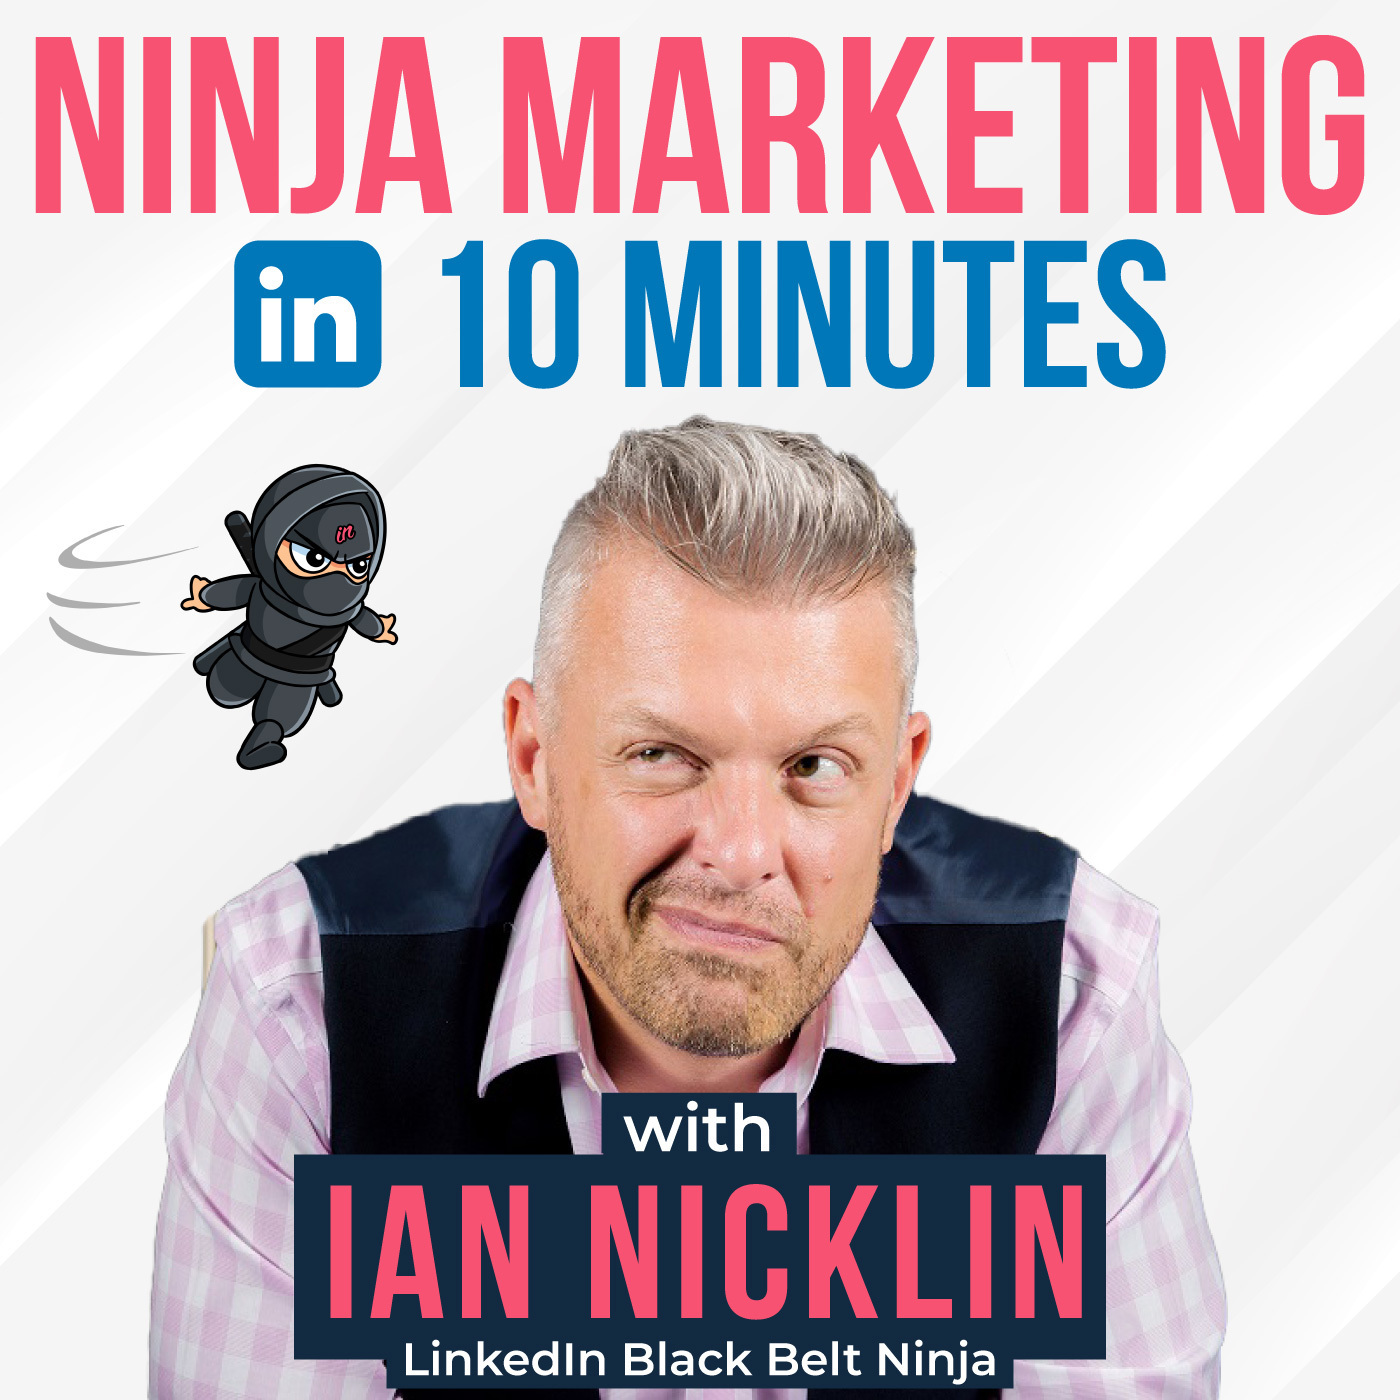 Ninja Marketing in 10 Minutes - What's it all about and how will it help me?